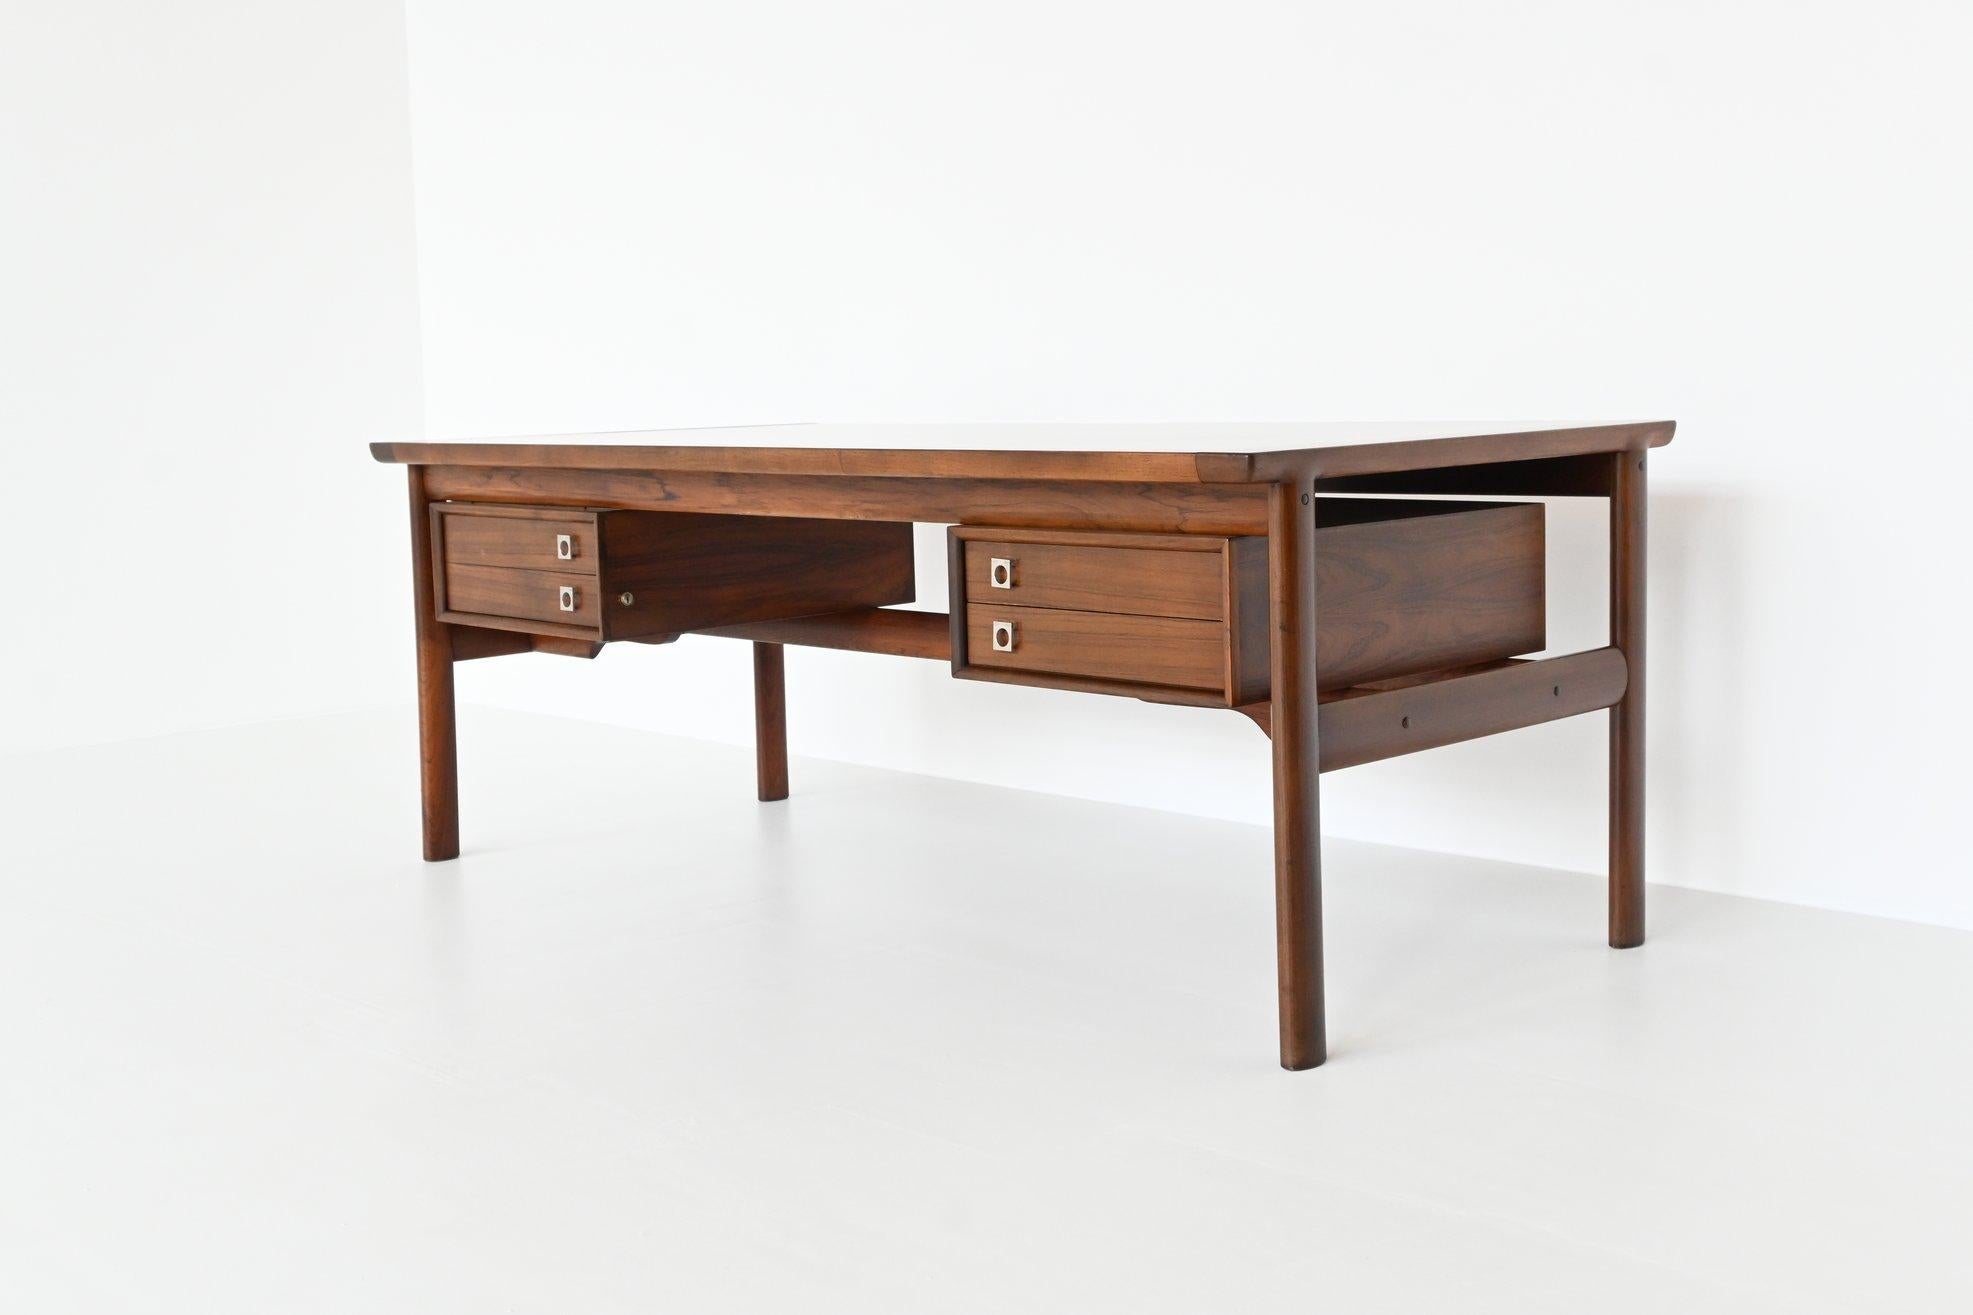 Iconic executive desk from the “200 series” designed by Arne Vodder; one of the best designers Denmark has known and it is manufactured by Sibast Furniture, Denmark 1960. This luxurious desk features a lot of storage space and shows wonderful